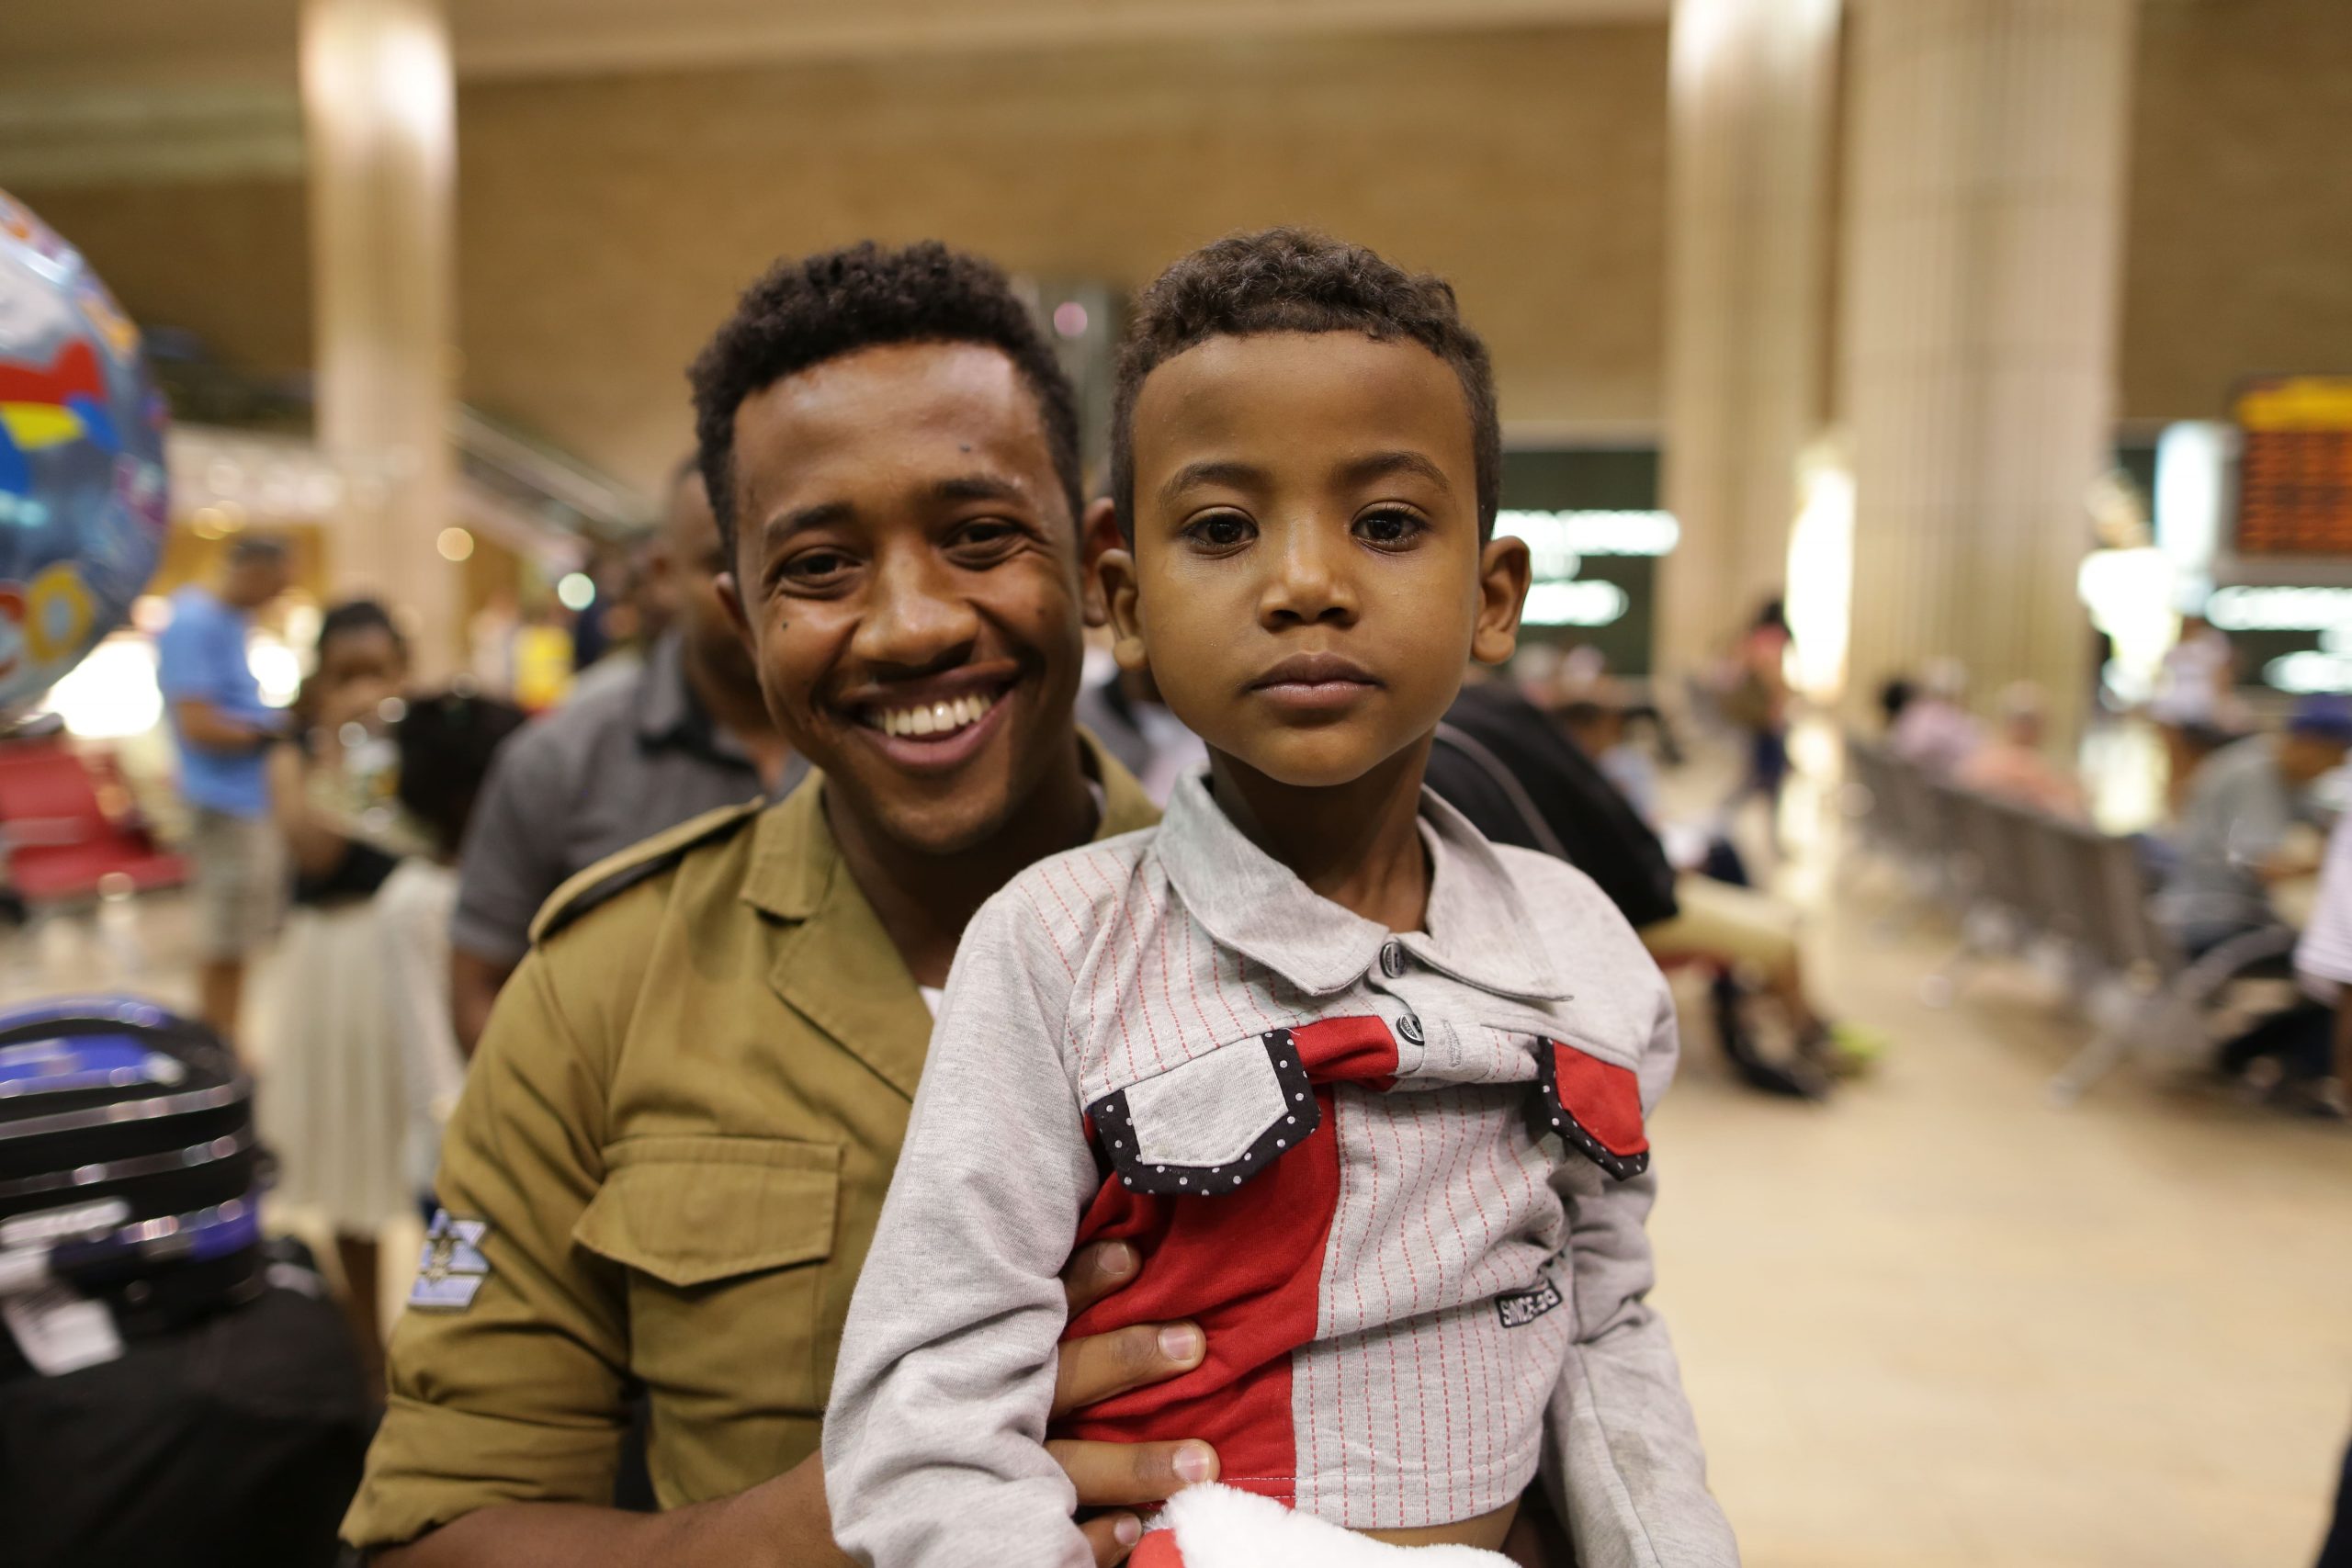 Ethiopians smile as they reunite with family upon landing in Israel